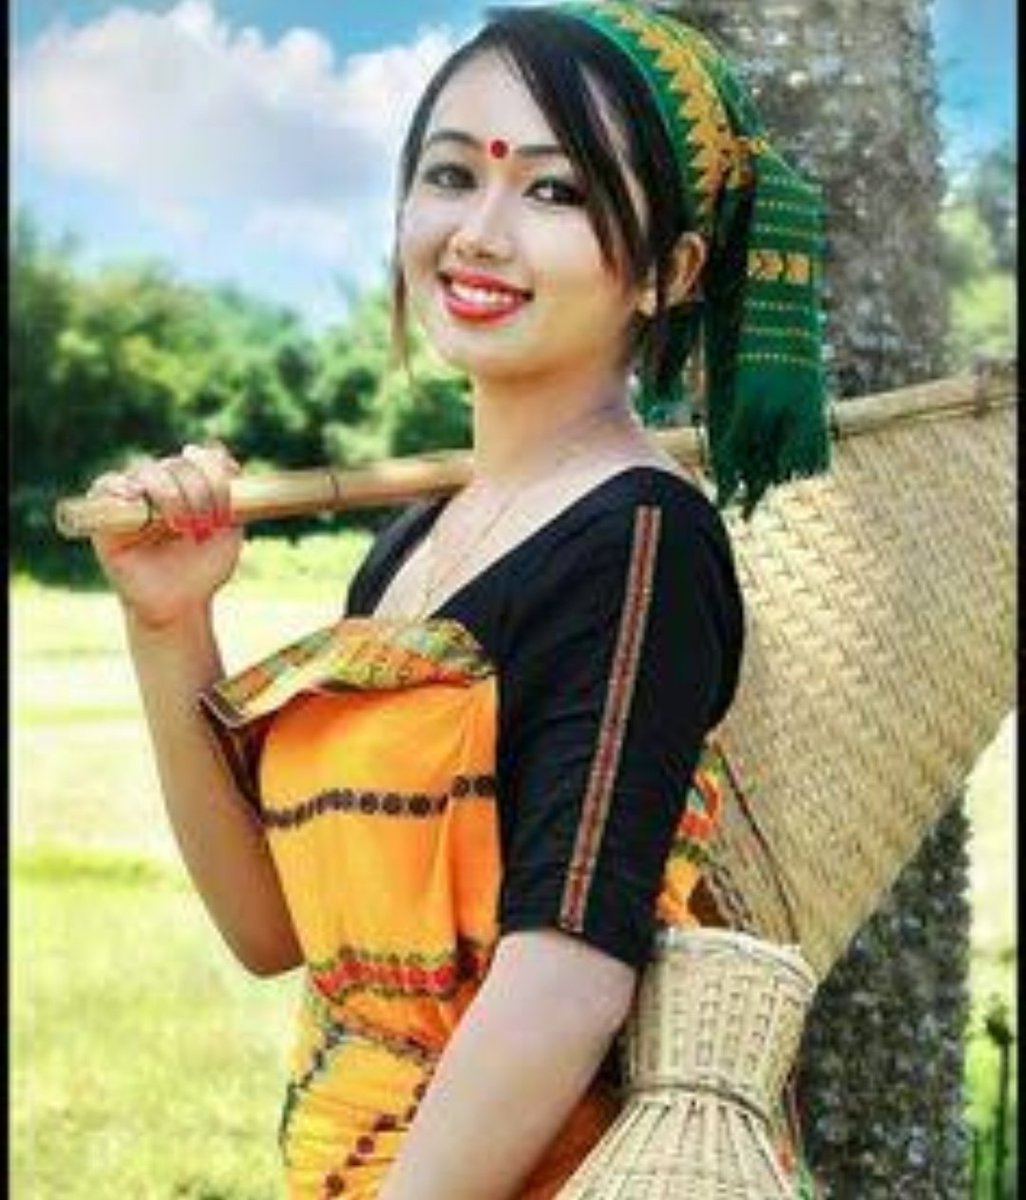 People offers colorful reflection of their land.The Mongoloid faced people of this region’s are very distinctive in characteristics of dress,customs & language.Major tribes of hills like Khasi,Garo & Jaintia are the people with very rich culture and traditions. @TourismSikkim